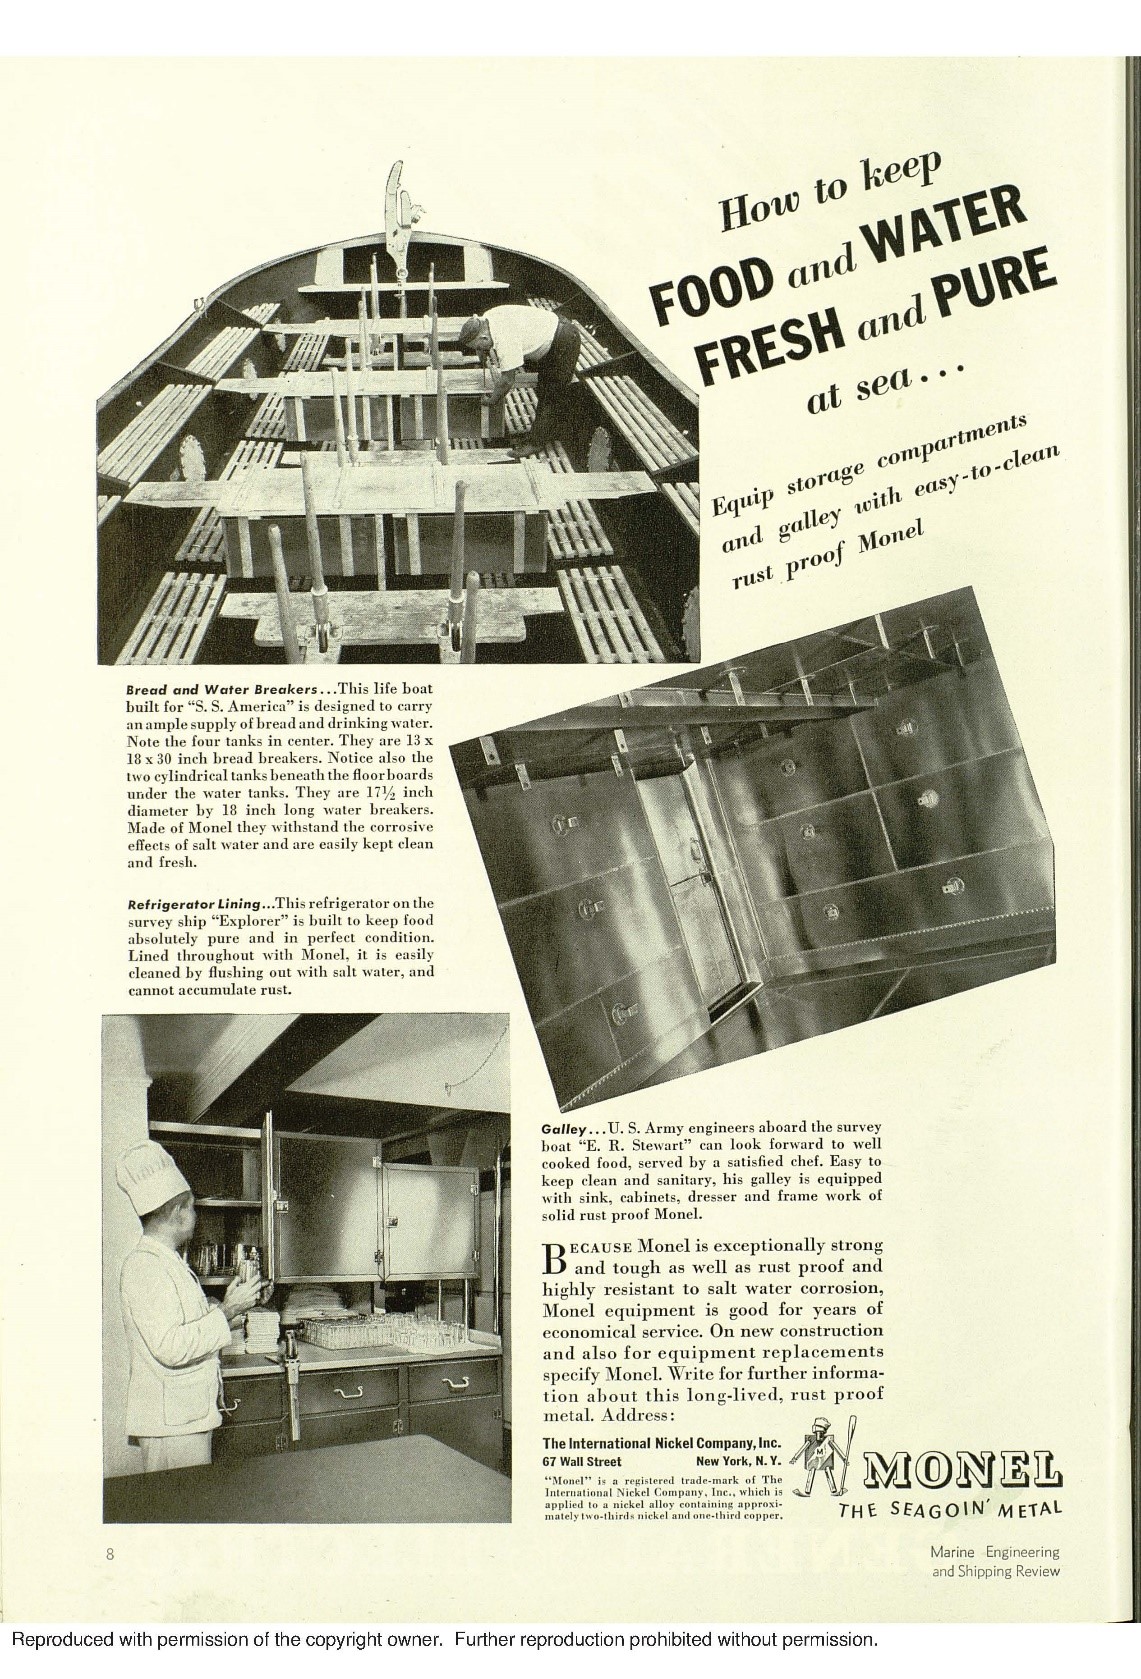 Fig. 5 An advertisement for Monel as a kitchen product at sea in the early 1940s in Marine Engineering and Shipping Review, INCO, January, 1941.